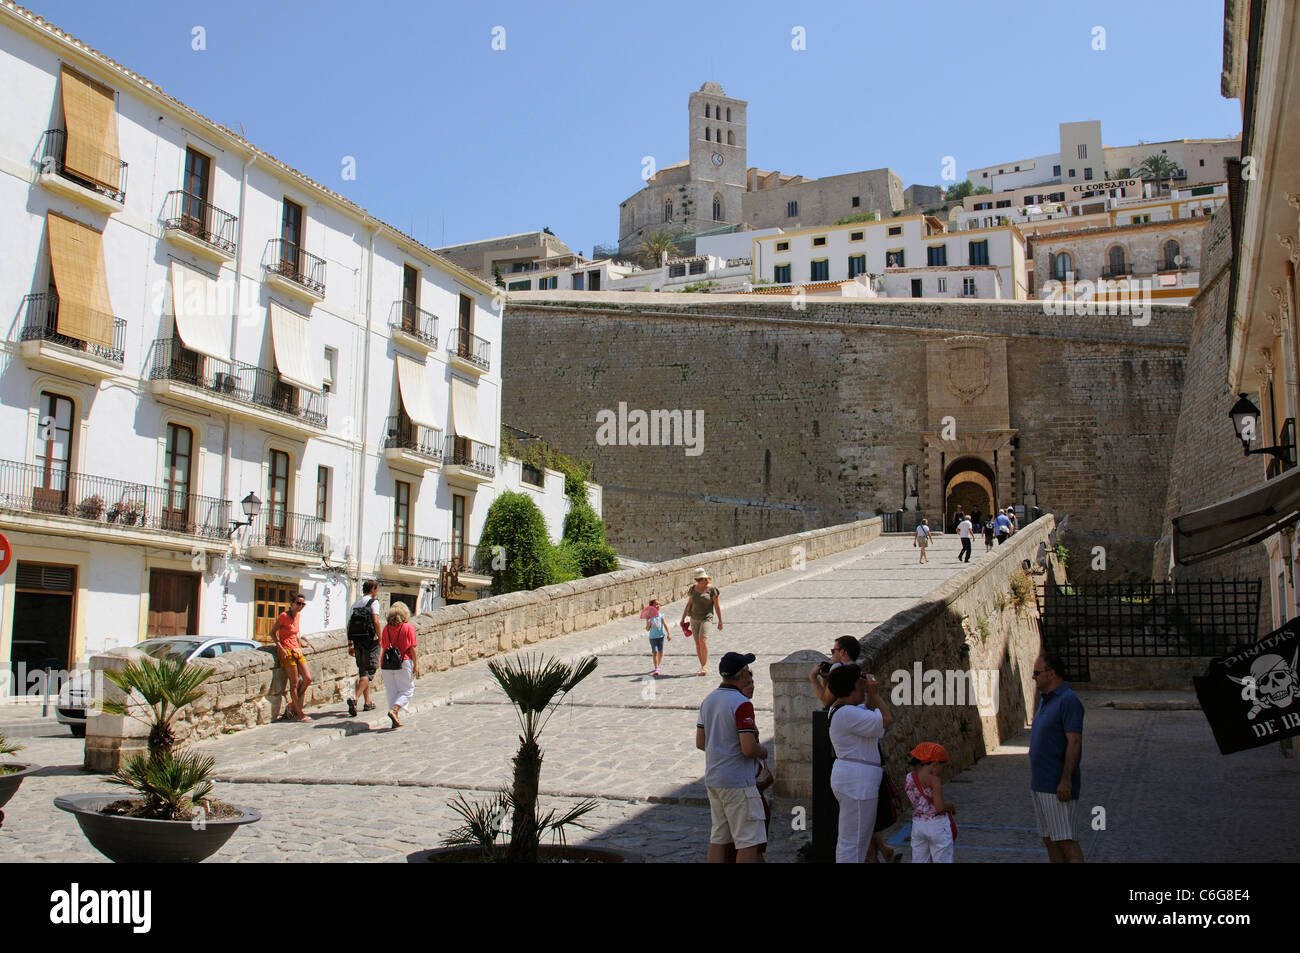 City wall and entrance to The Dalt Vila area in the old town of Eivissa Ibiza Island Spain Stock Photo